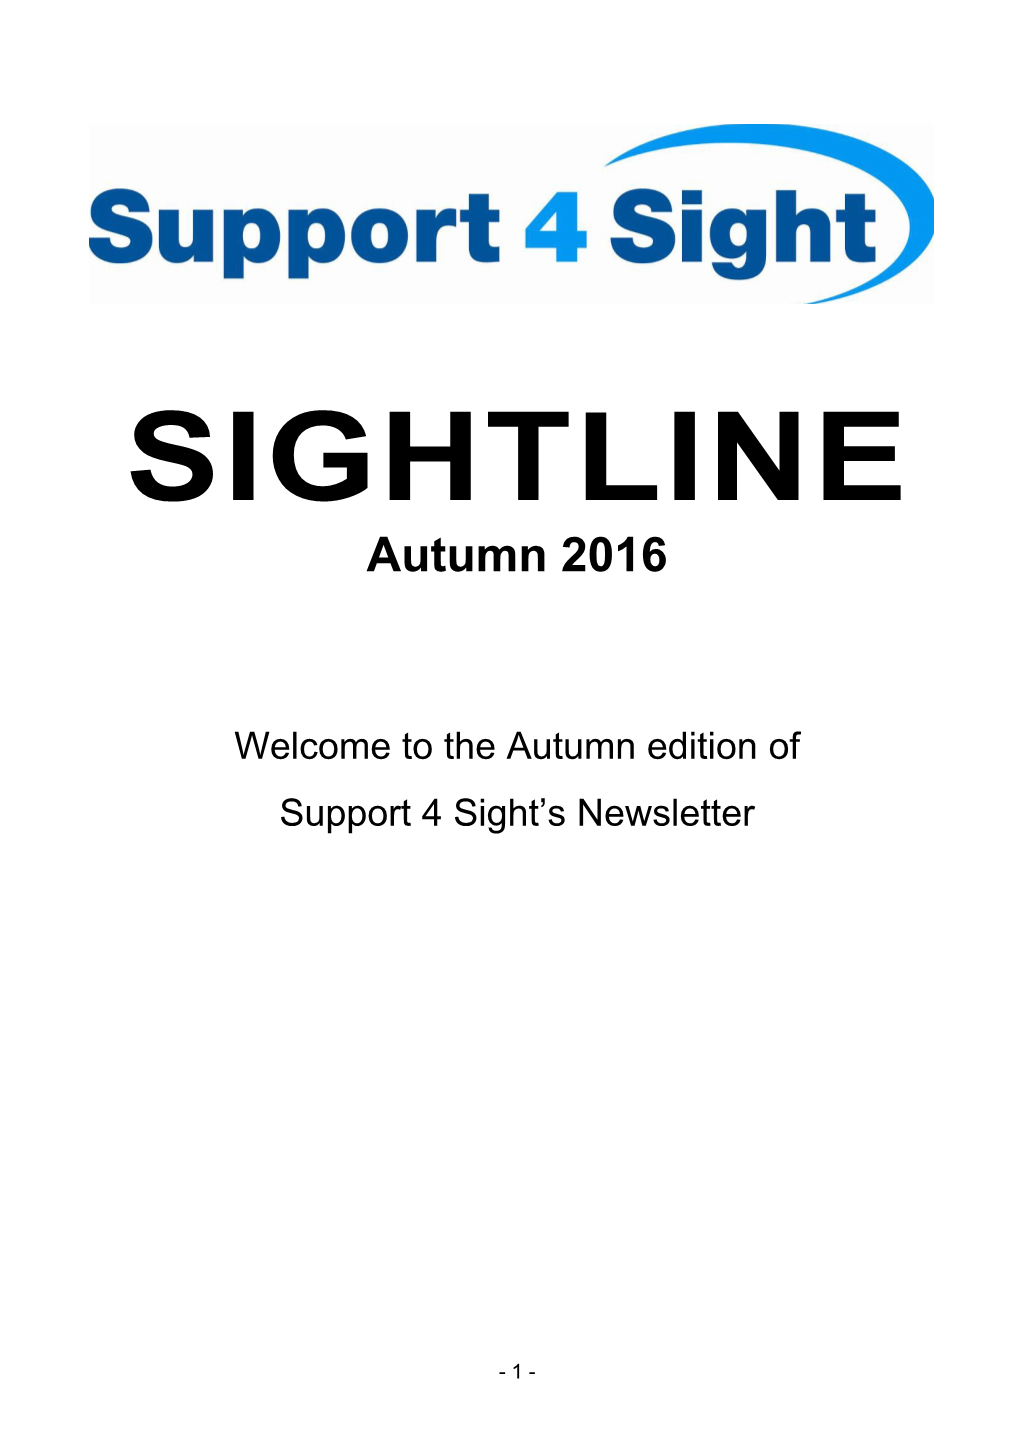 Welcome to the Autumn Edition Of